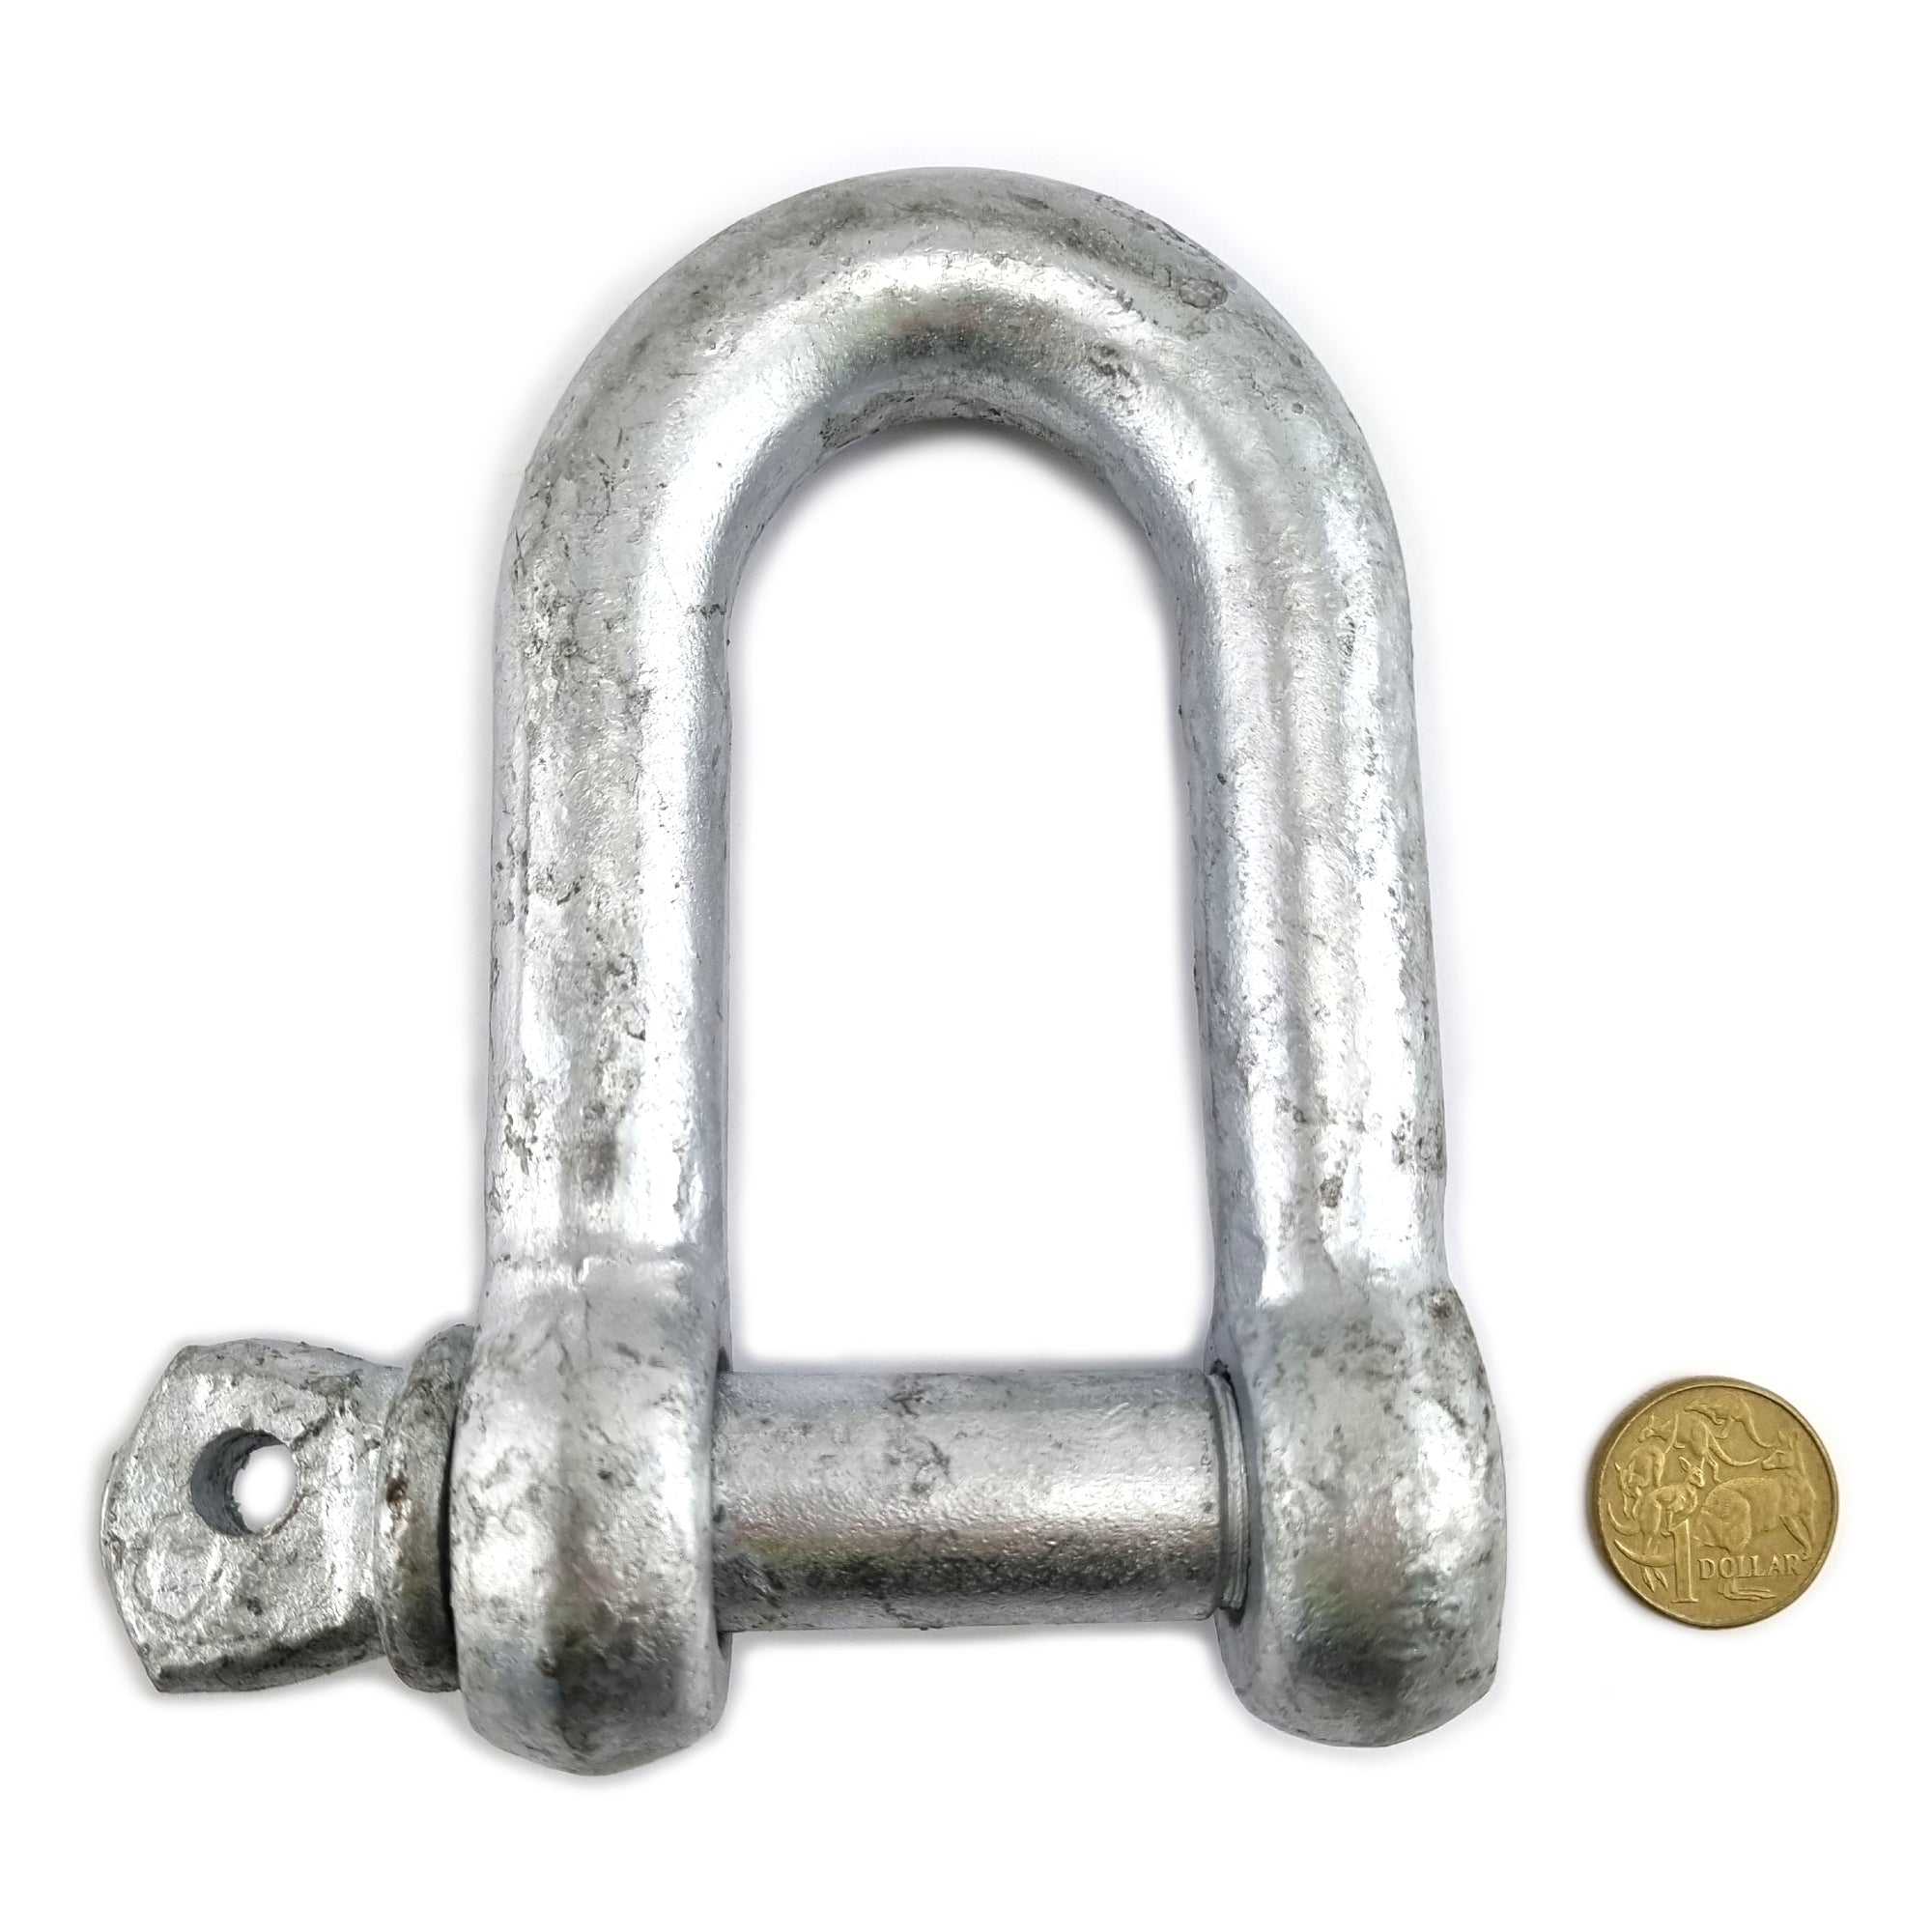 22mm Galvanised D Shackle. Shop D-Shackles and Hardware online at factory direct prices. Shipping Australia wide or Melbourne pick-up